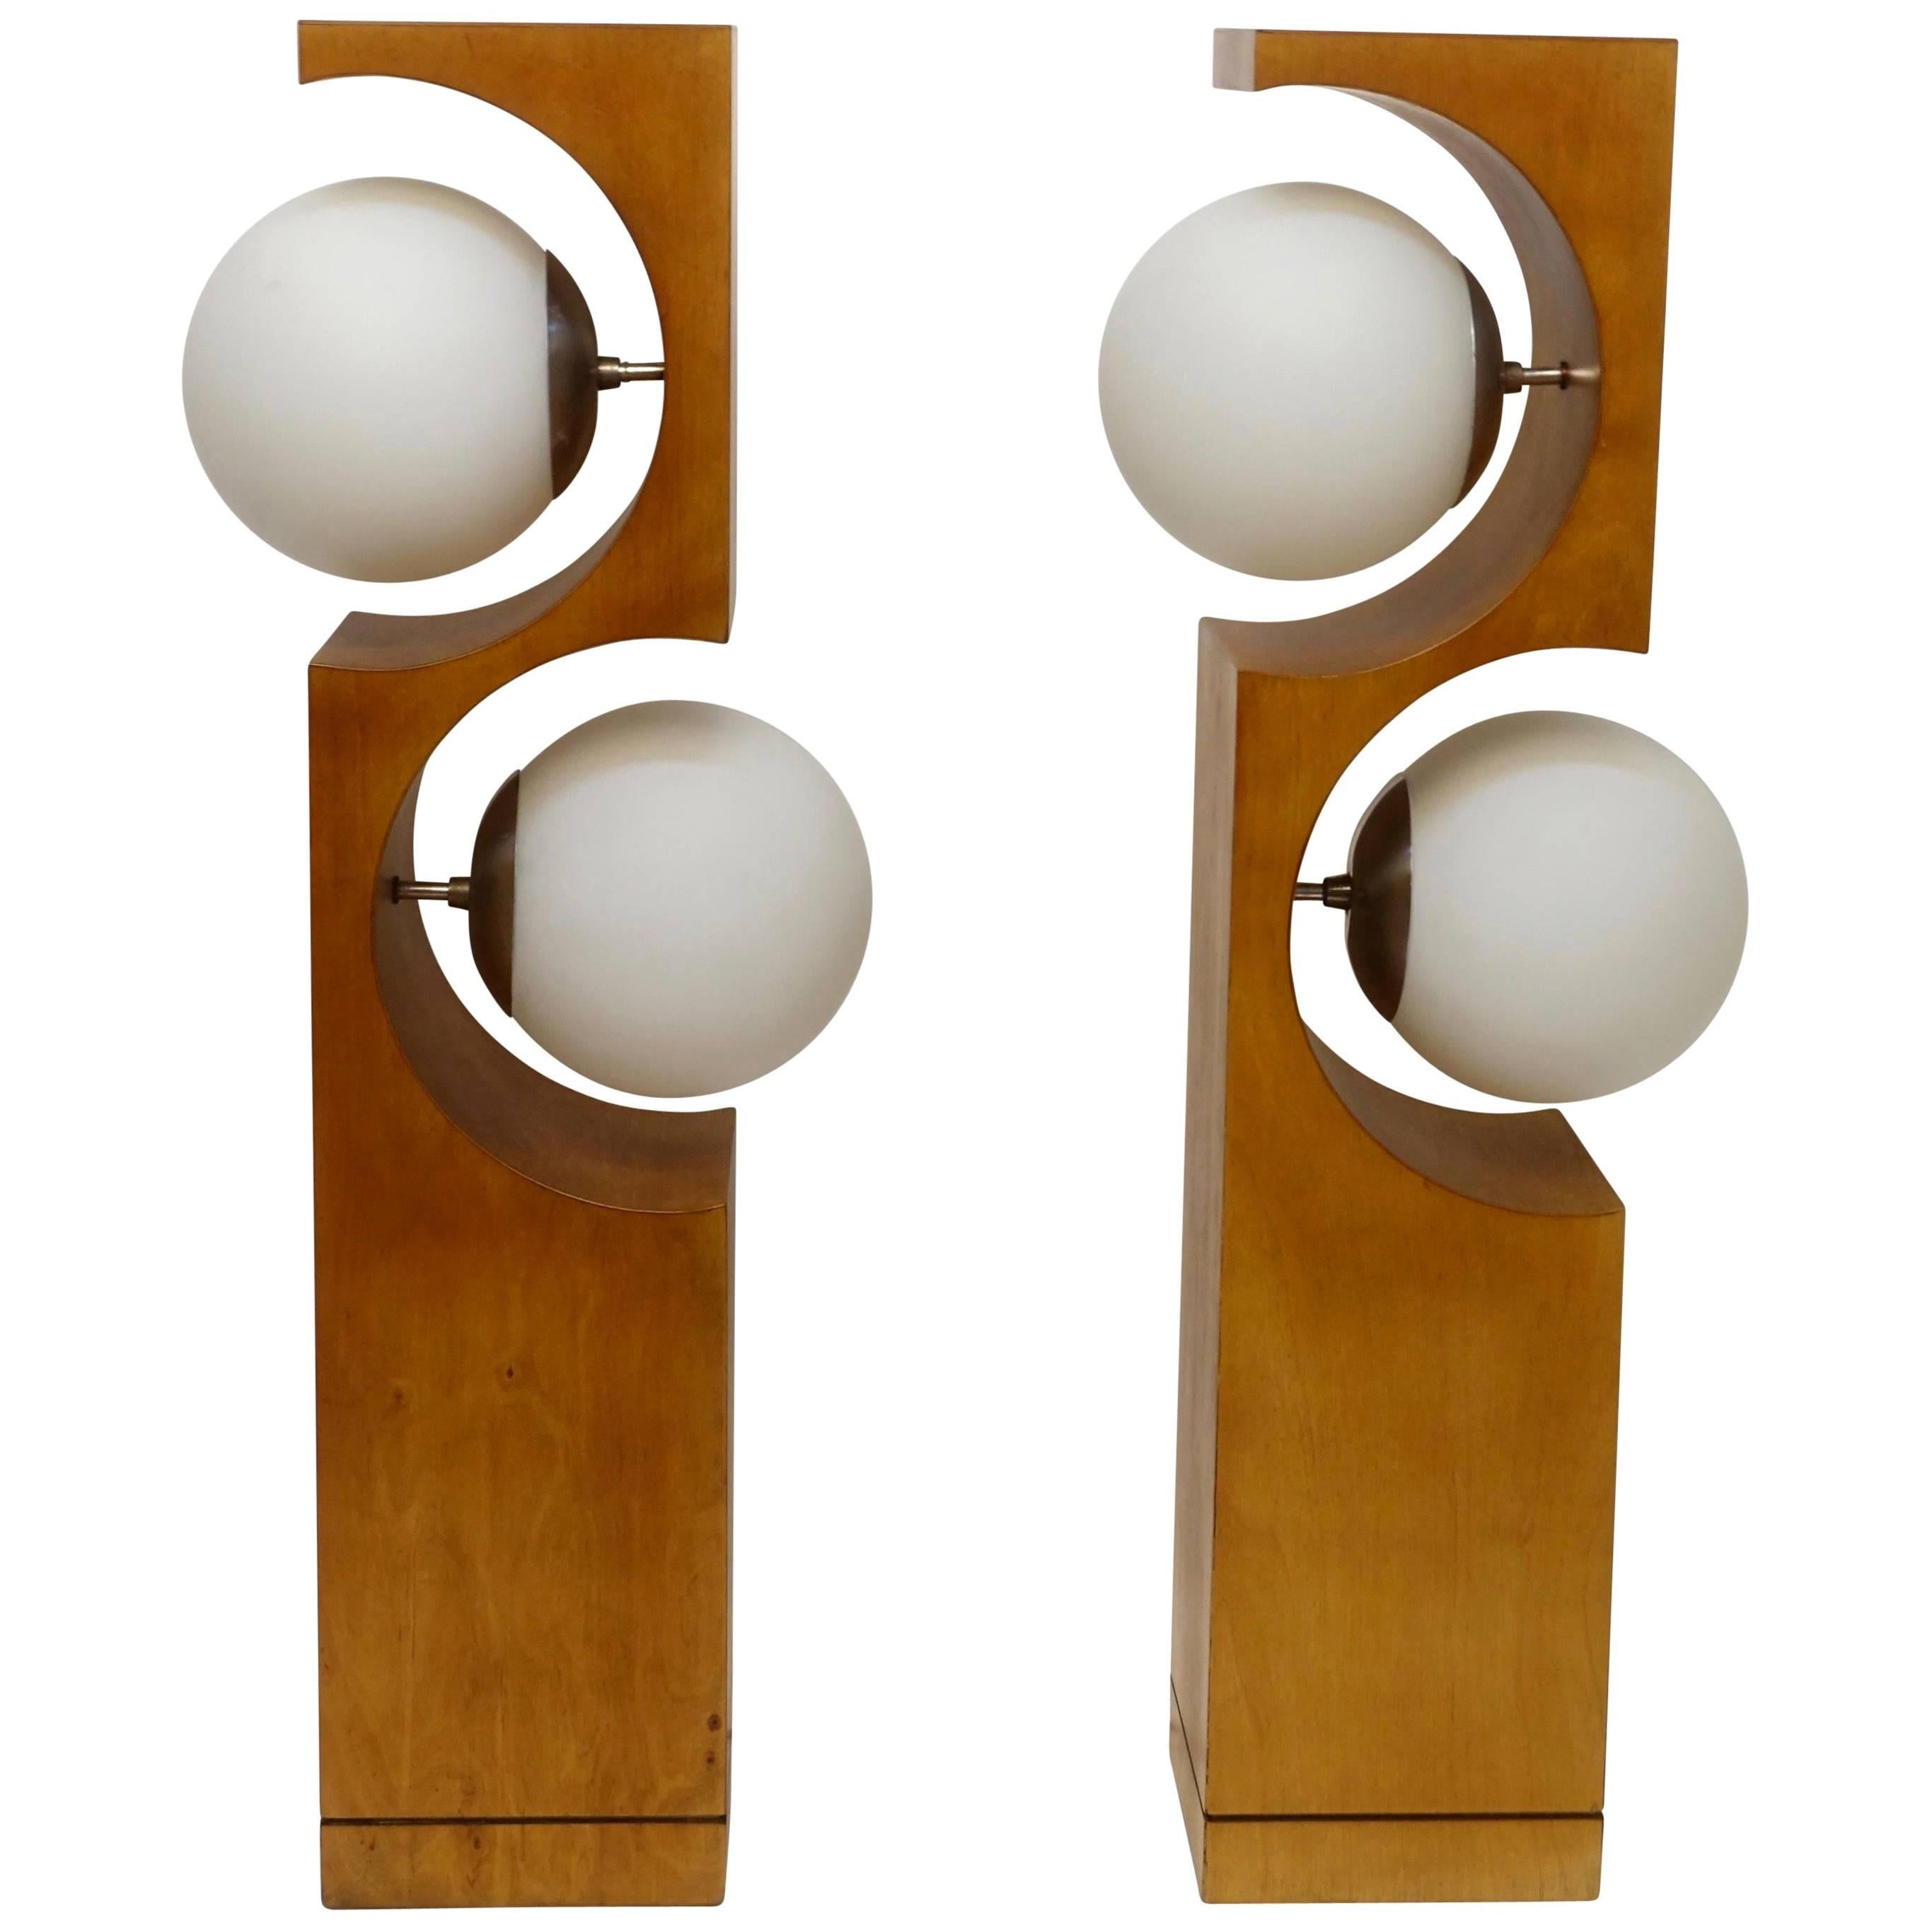 Pair of Mid-20th Century Milo Baughman Wood Cut-Out Lamps